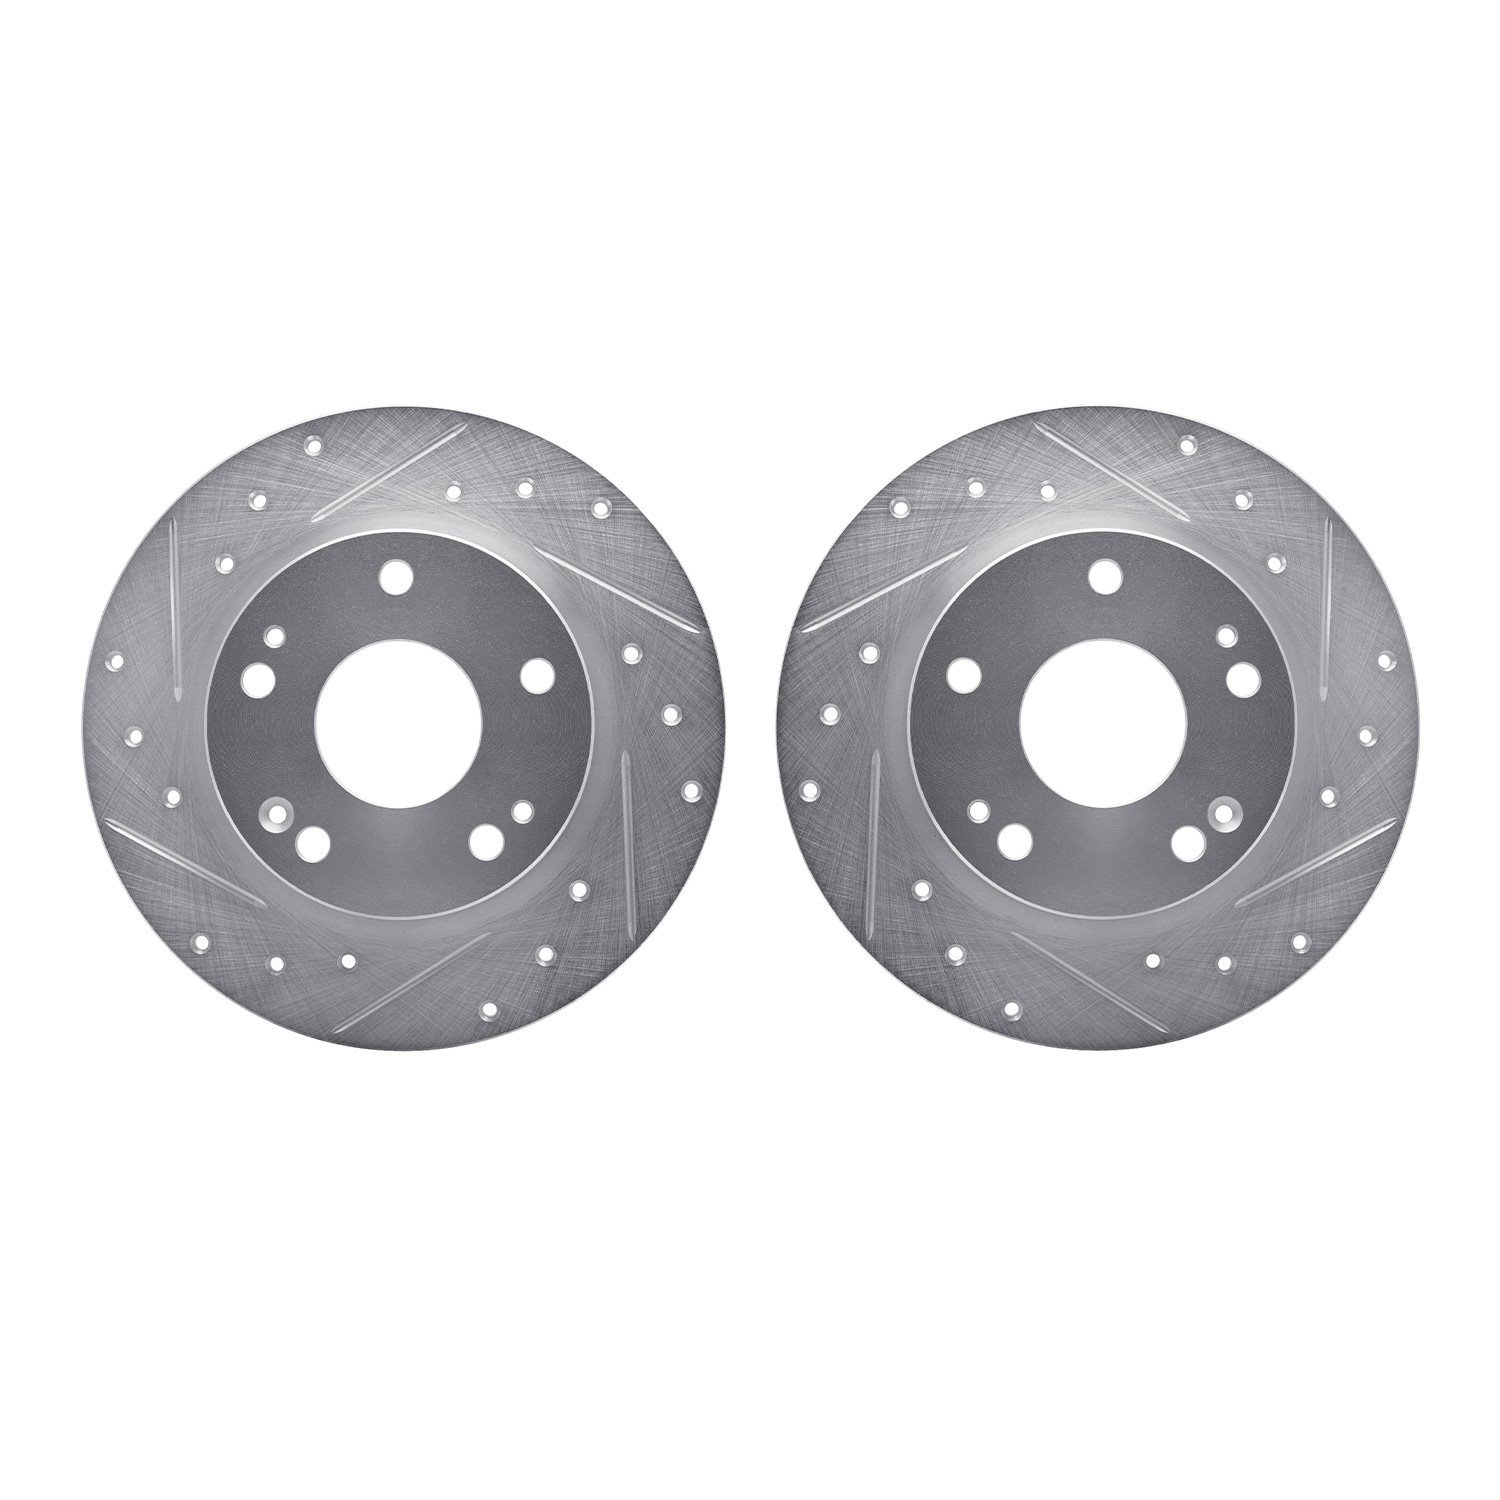 7002-59058 Drilled/Slotted Brake Rotors [Silver], Fits Select Acura/Honda, Position: Rear